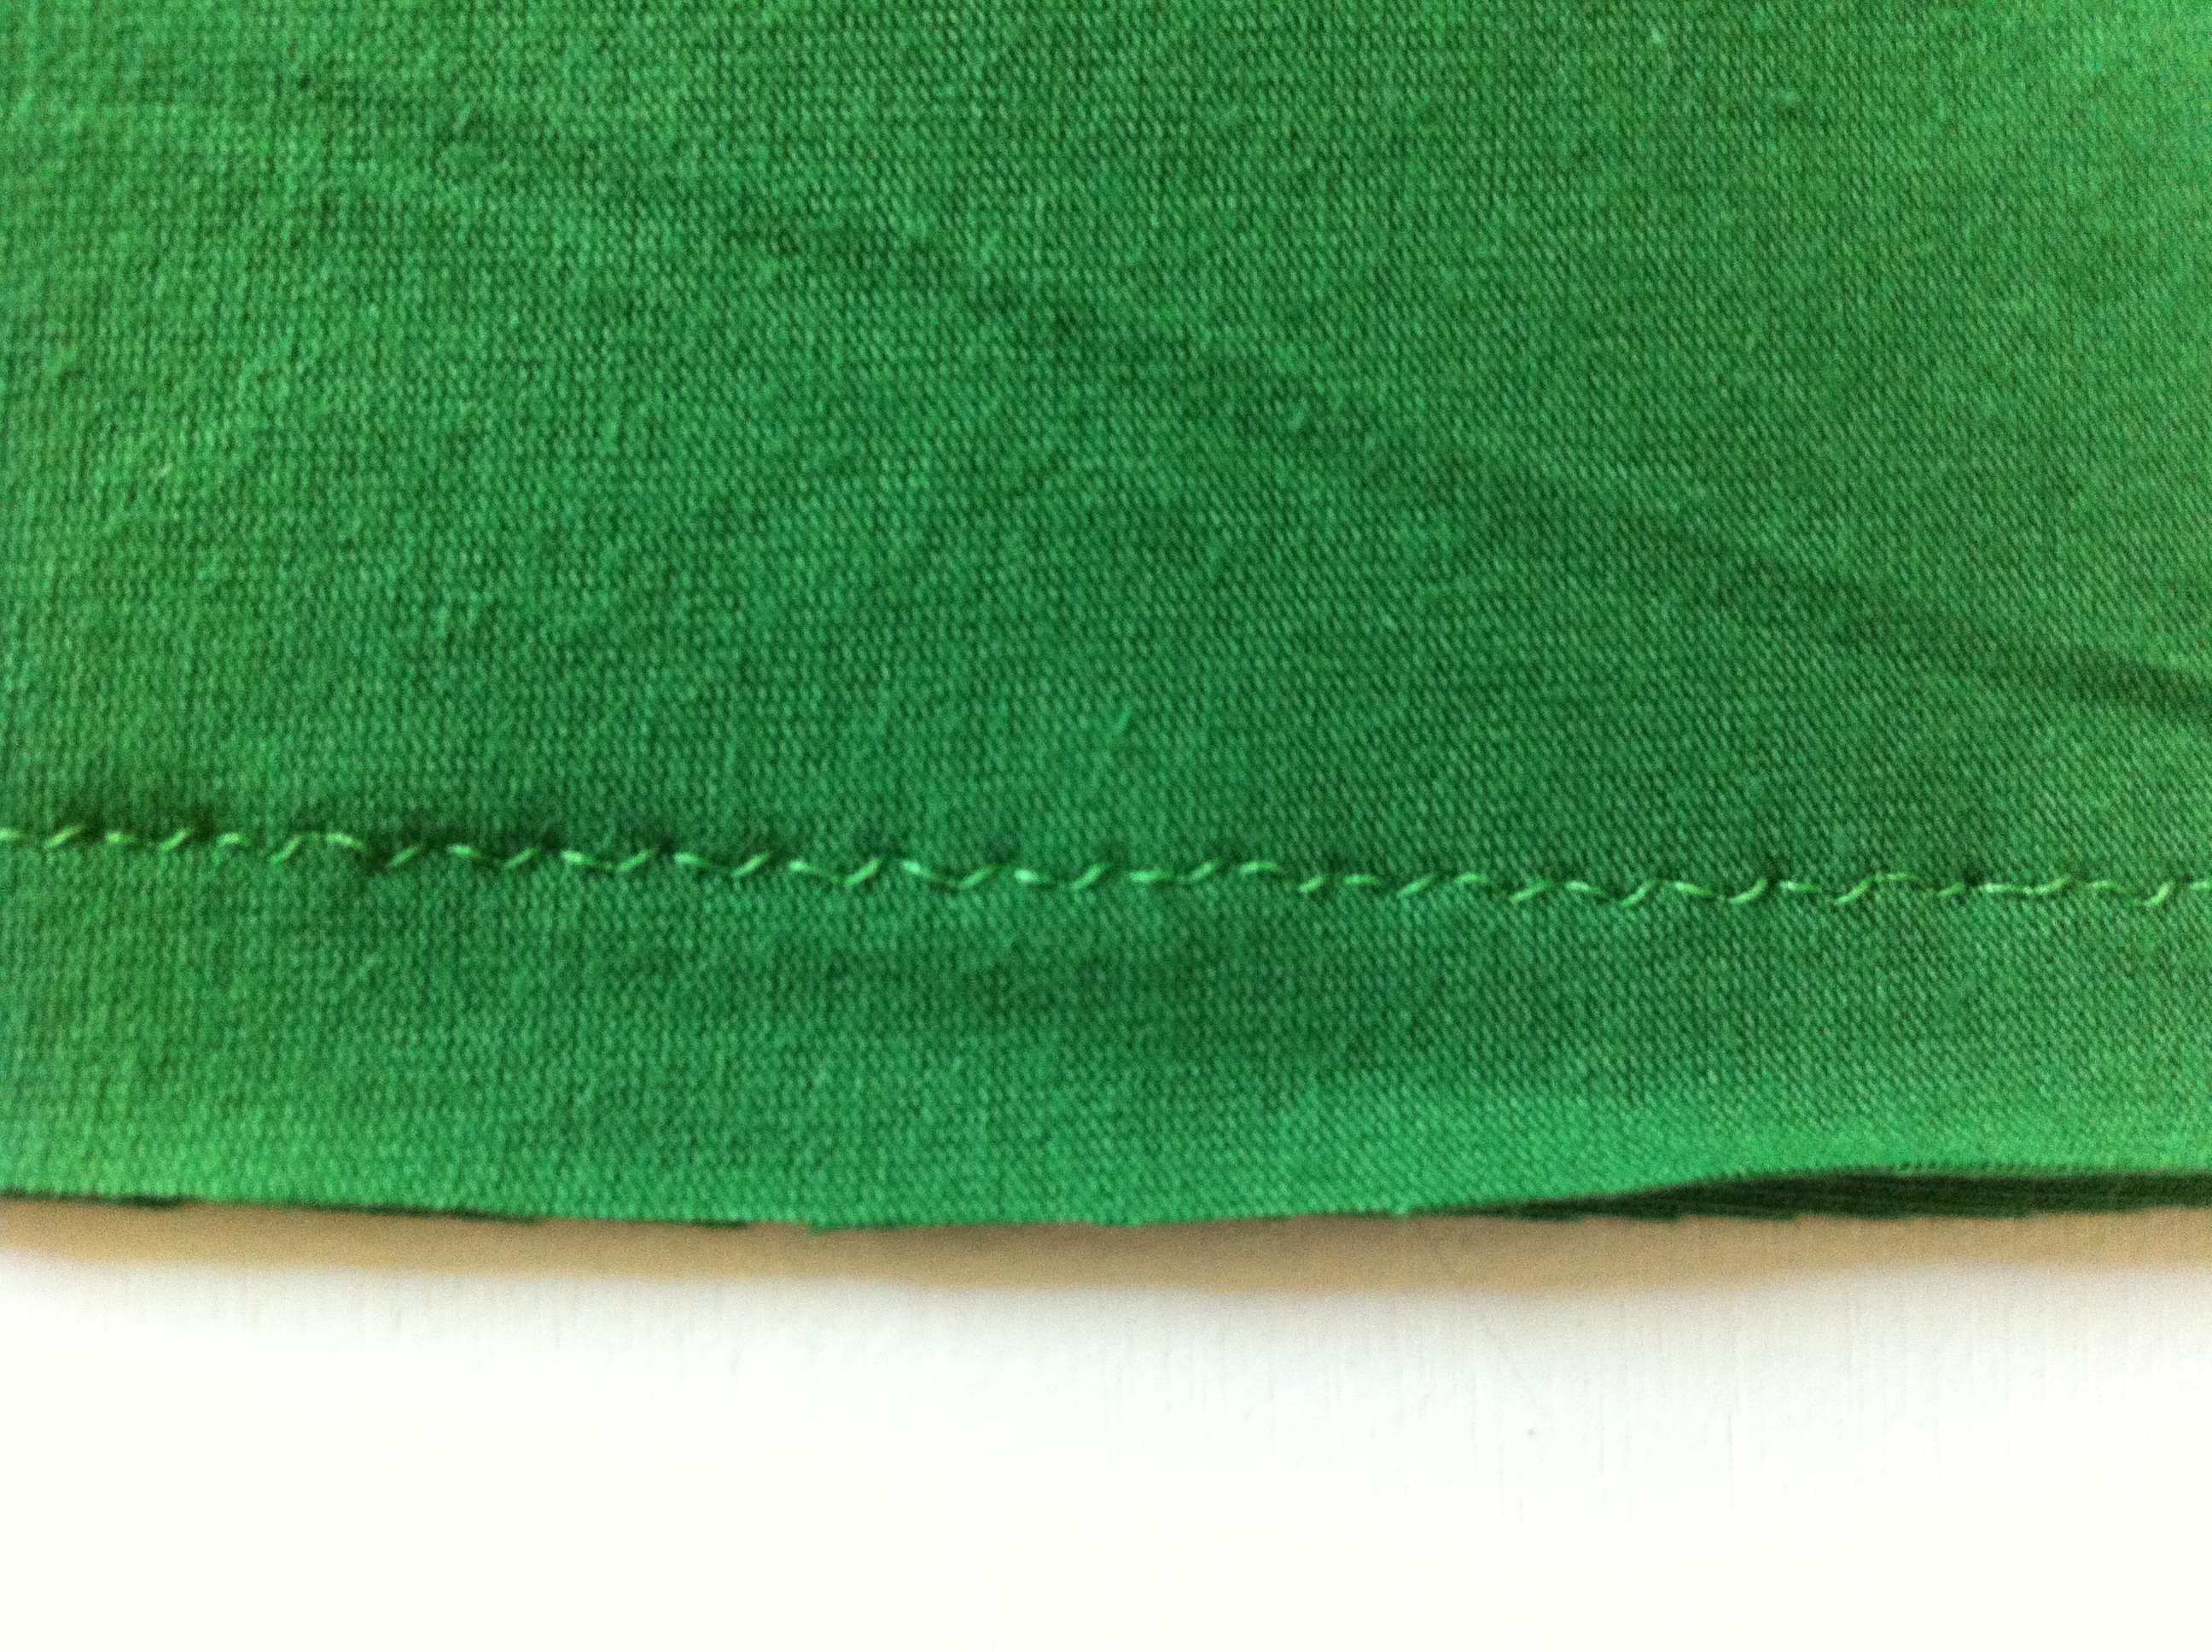 How to Sew Stretch Fabrics - 3 Simple Steps for Success! — SewCanShe ...